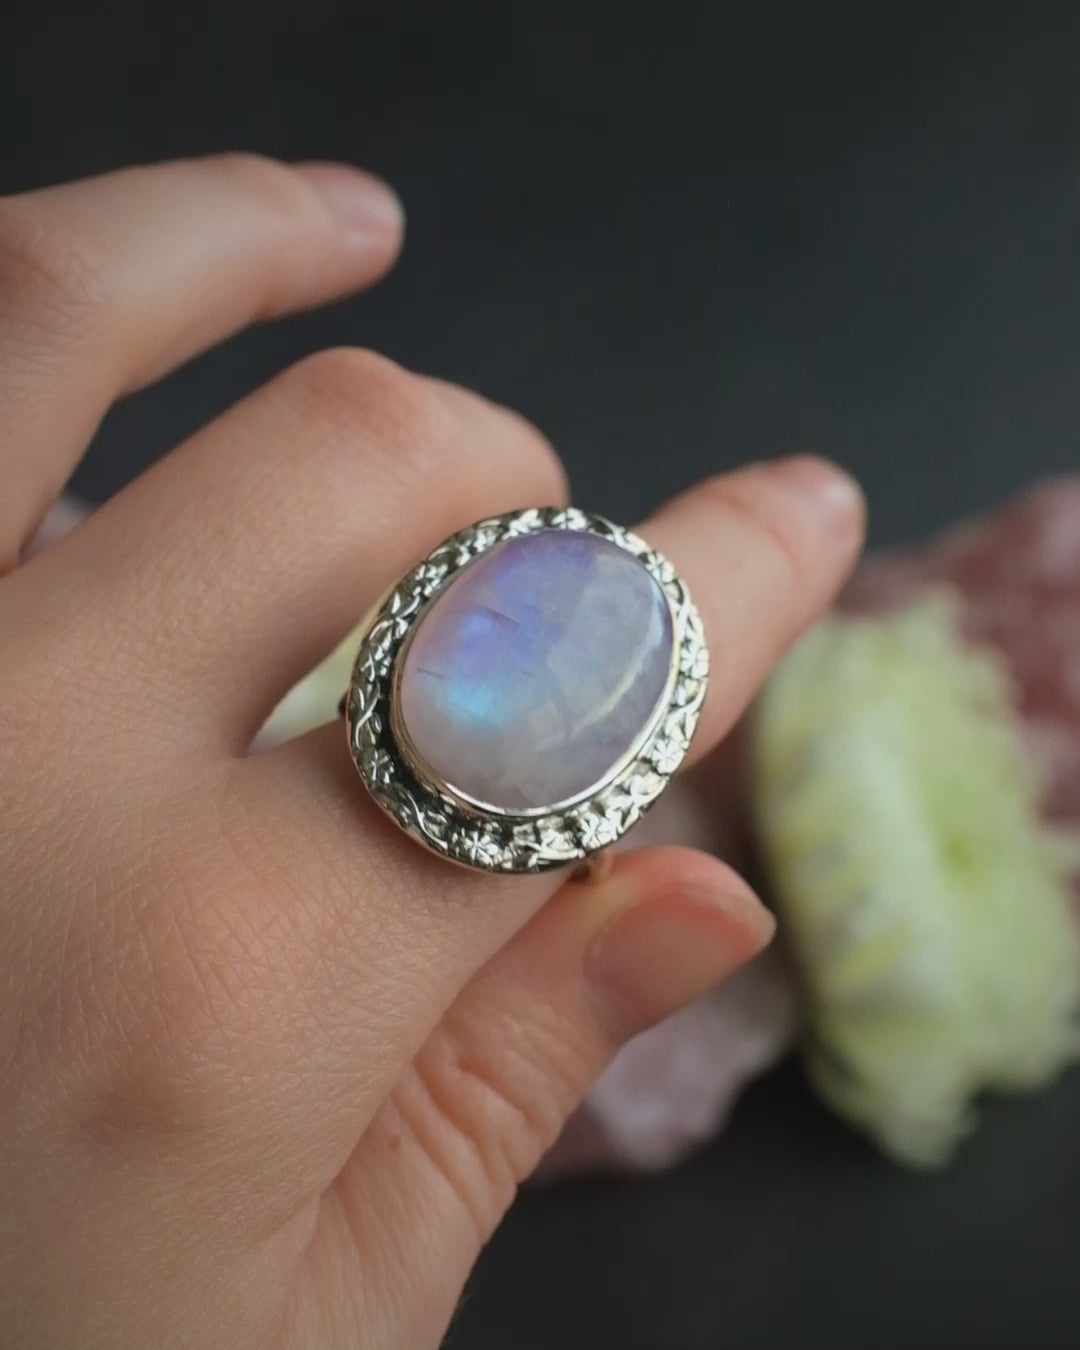 Pink Moonstone Oval Ring in Sterling Silver - Size 9 US / R 3/4 UK